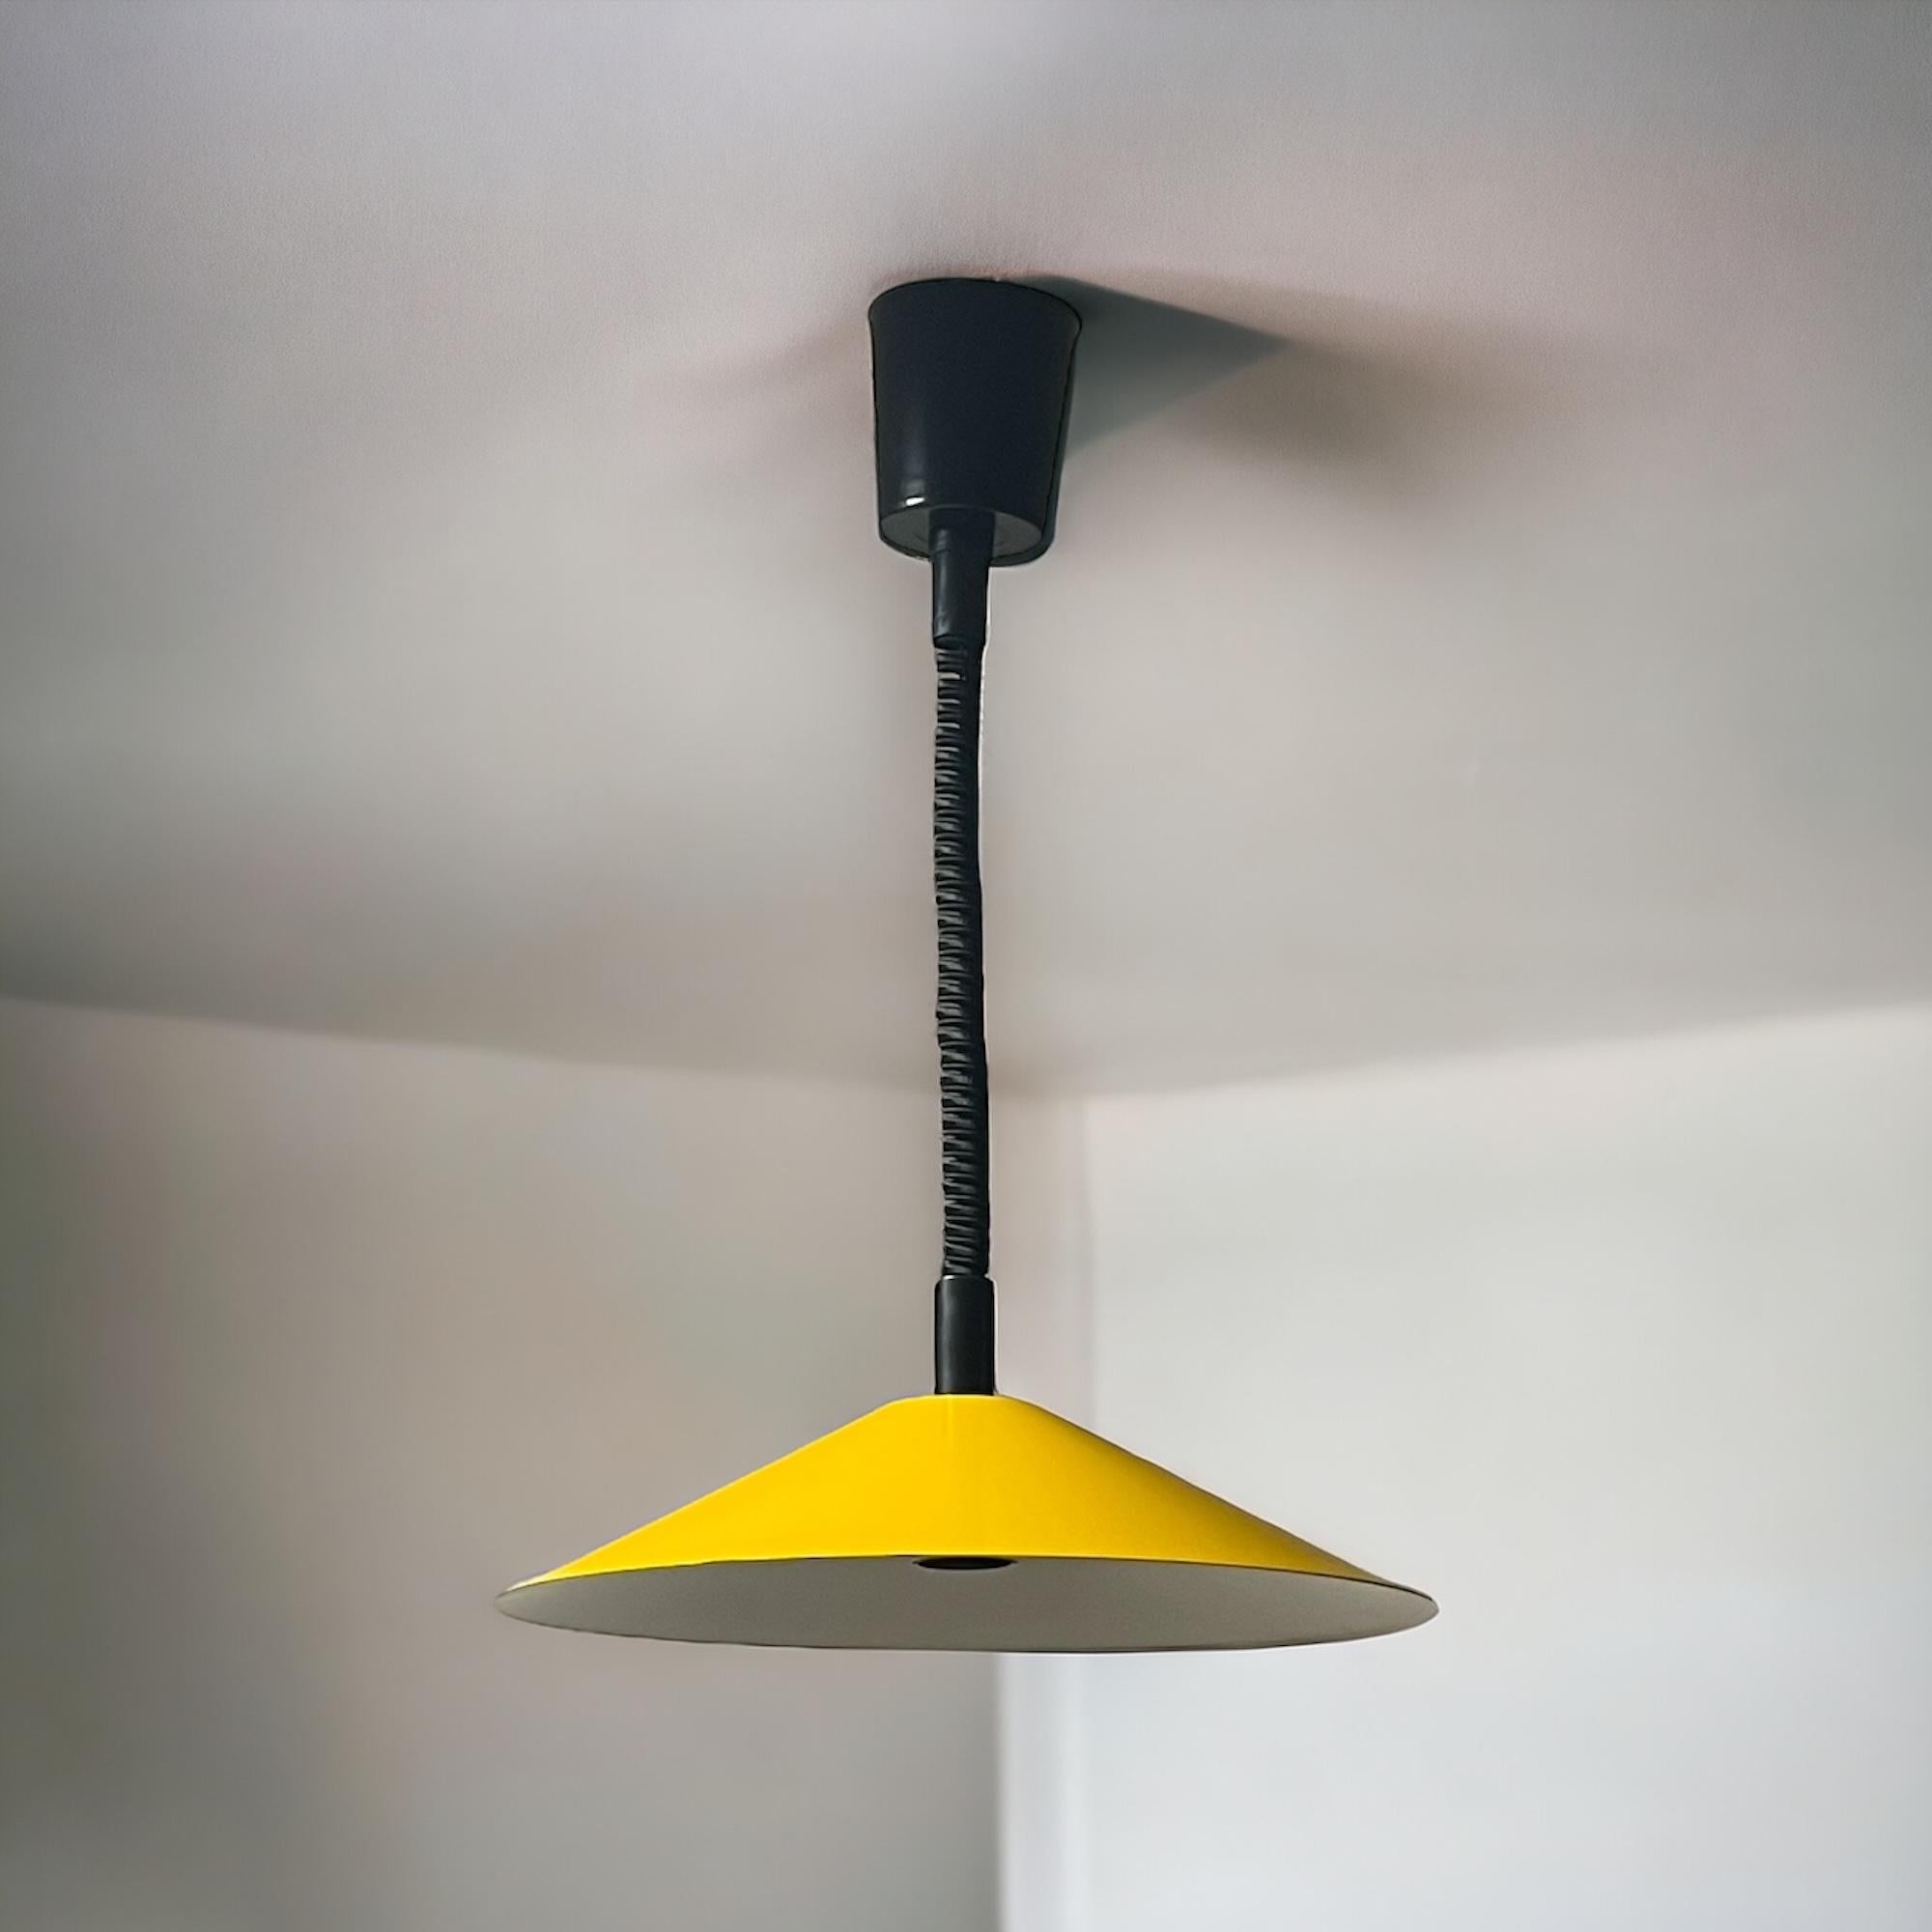 Vintage 1970s Italian Space Age Hanging Lamp - Vibrant Yellow Hue 3